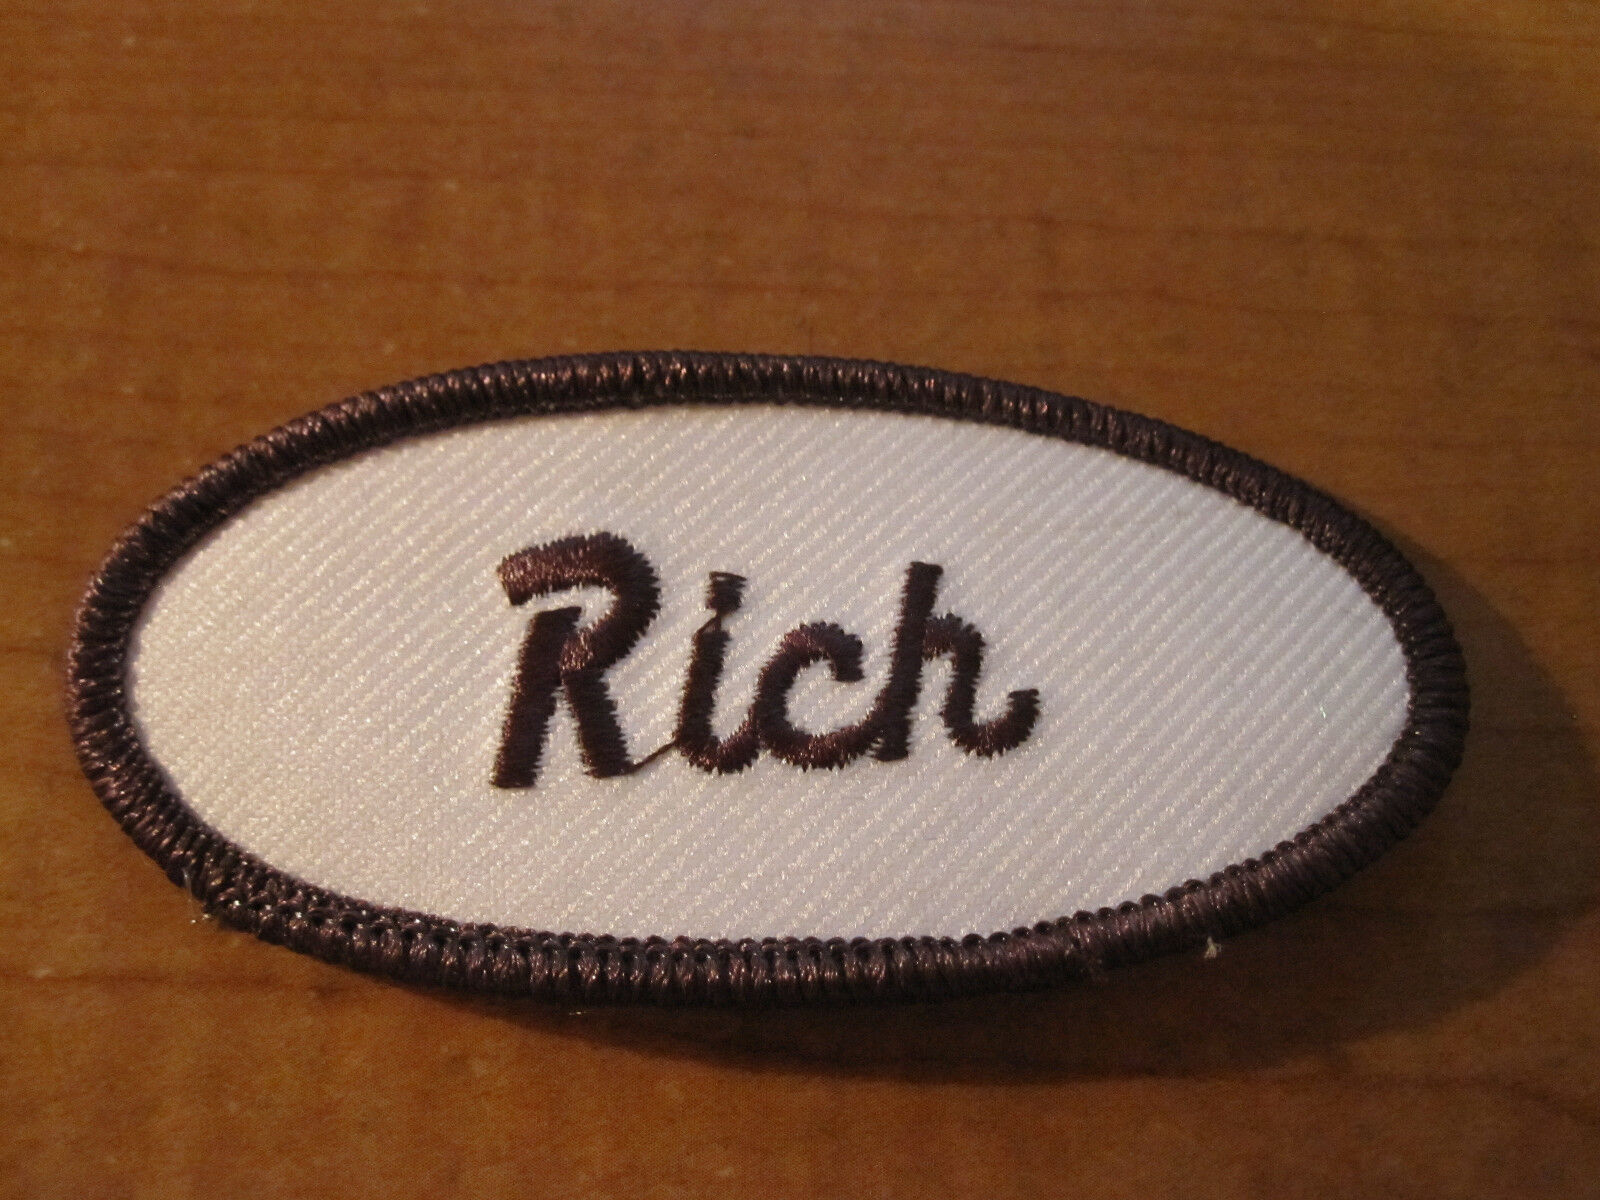 RICH Uniform Name Tag Embroidered Cloth PATCH Service Station Biker Utility